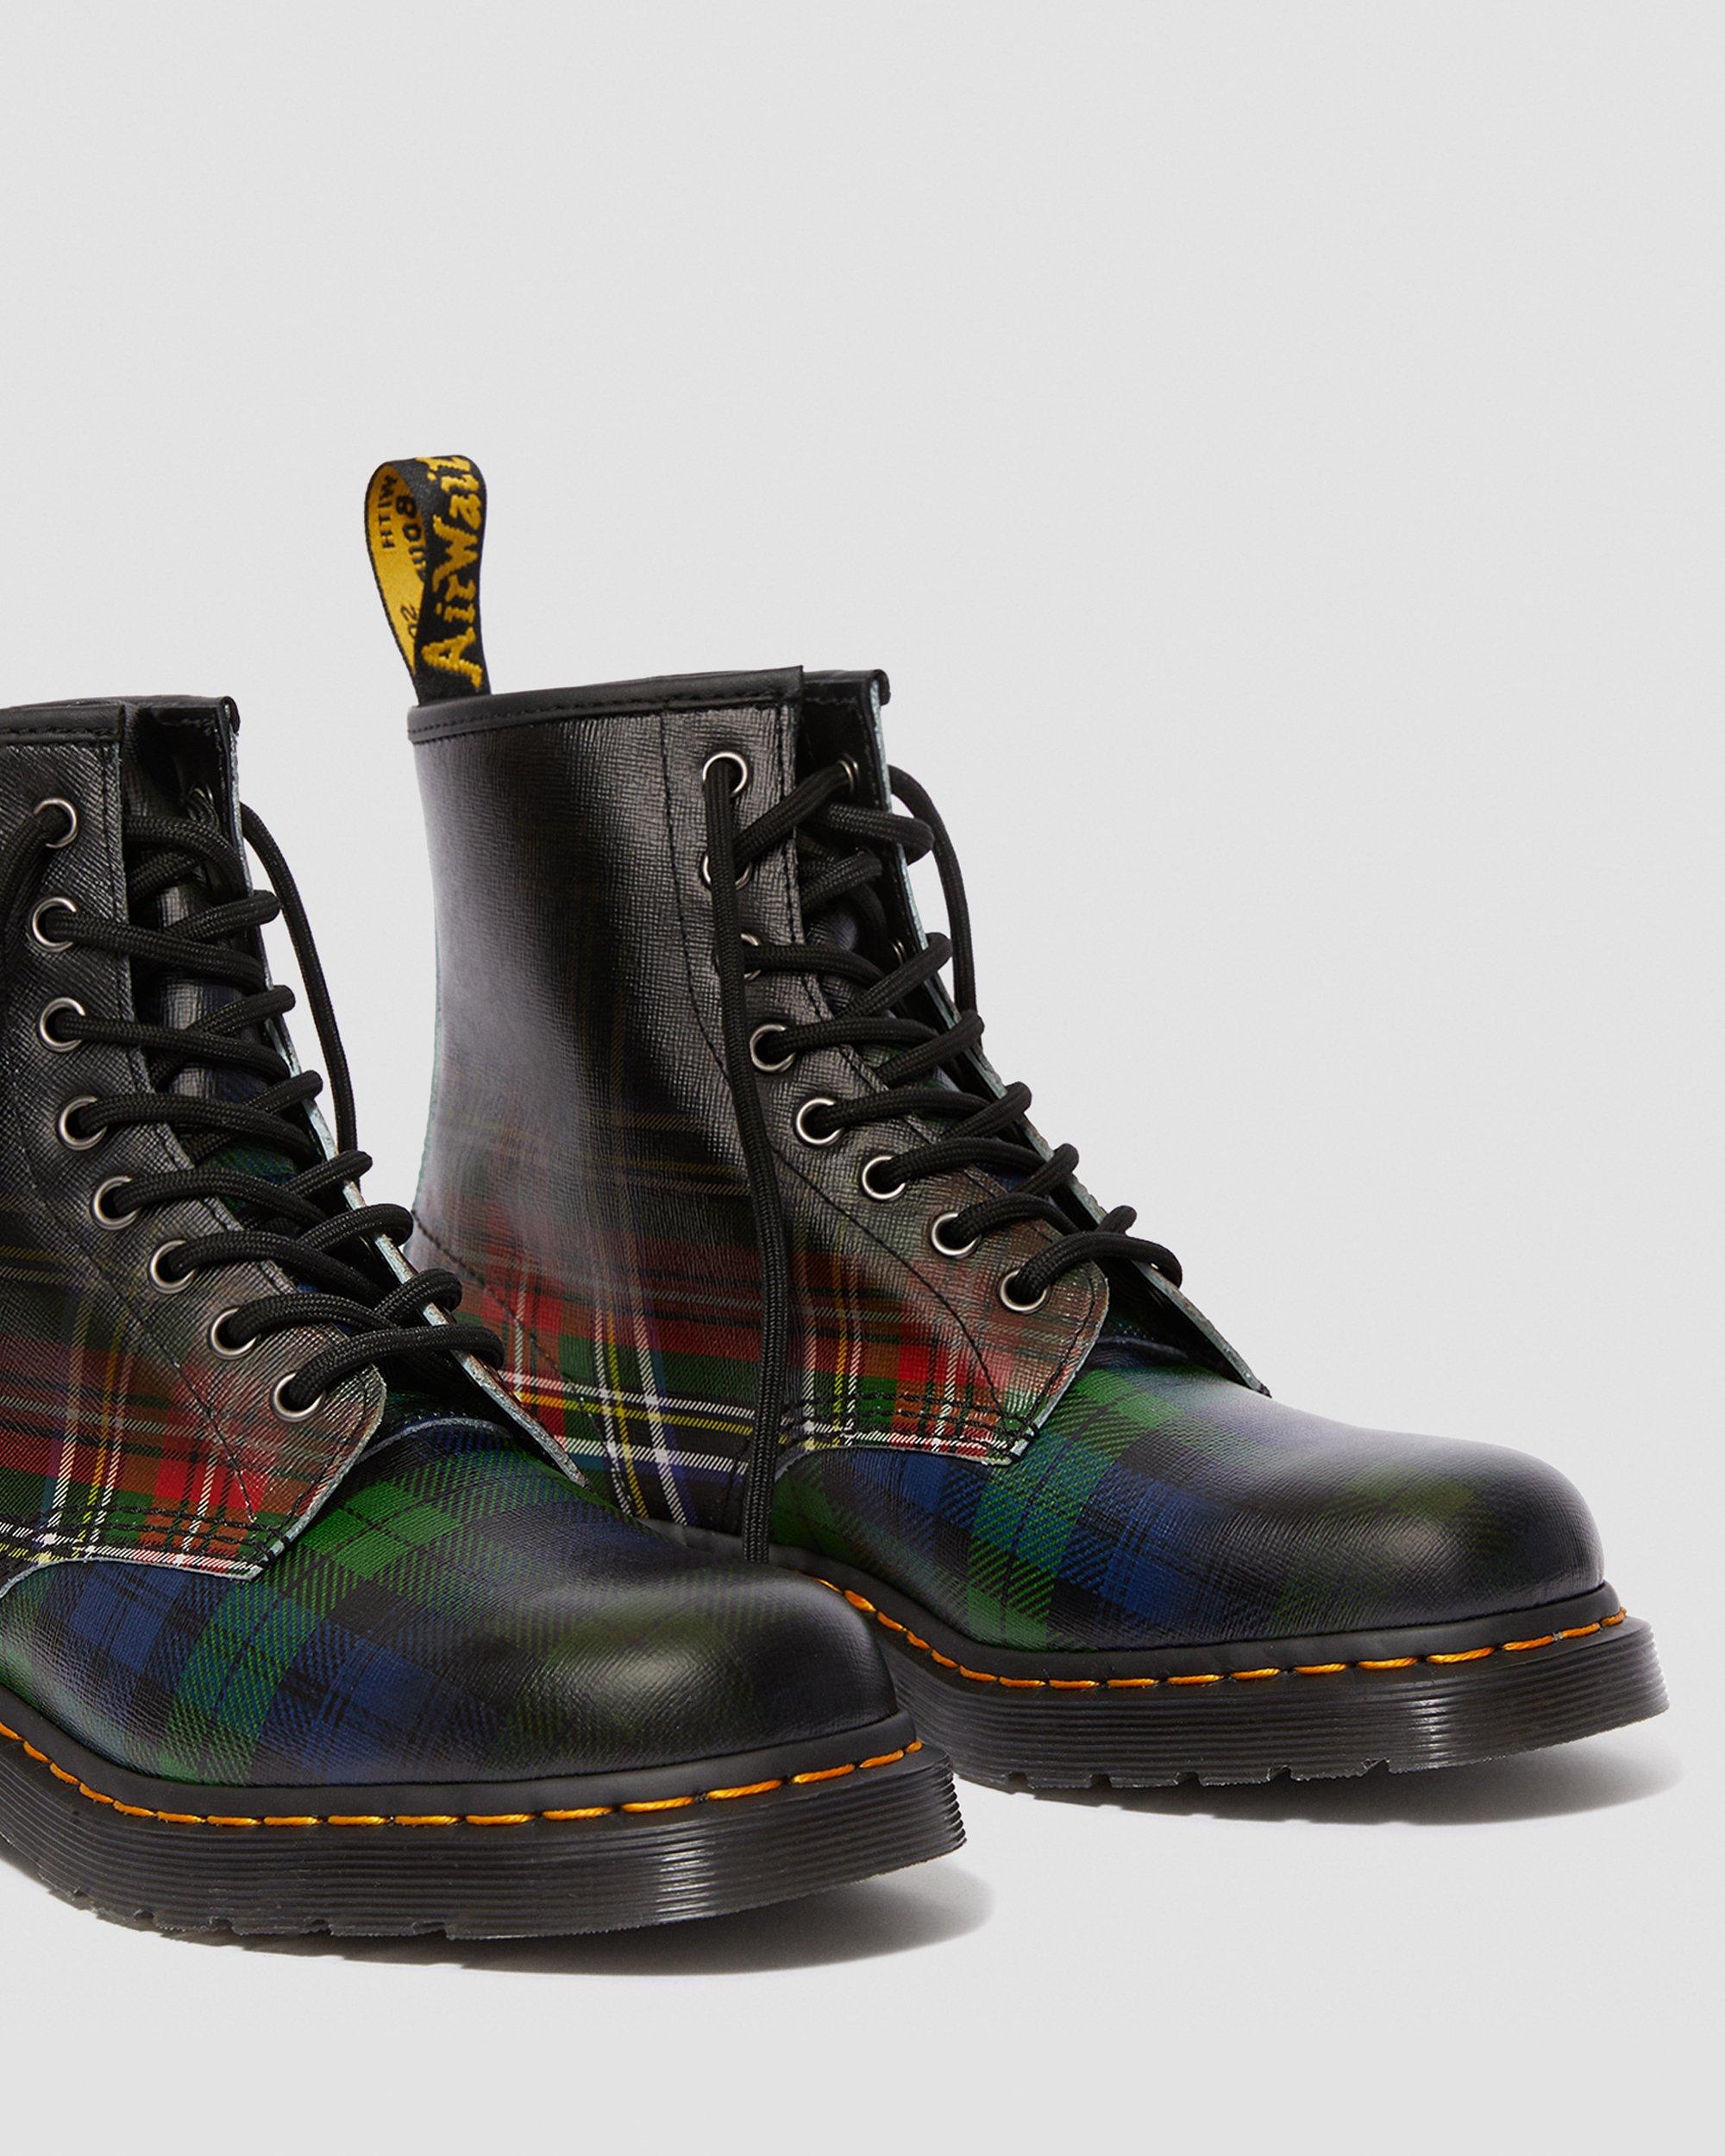 DR MARTENS 1460 Tartan Leather Lace Up Boots